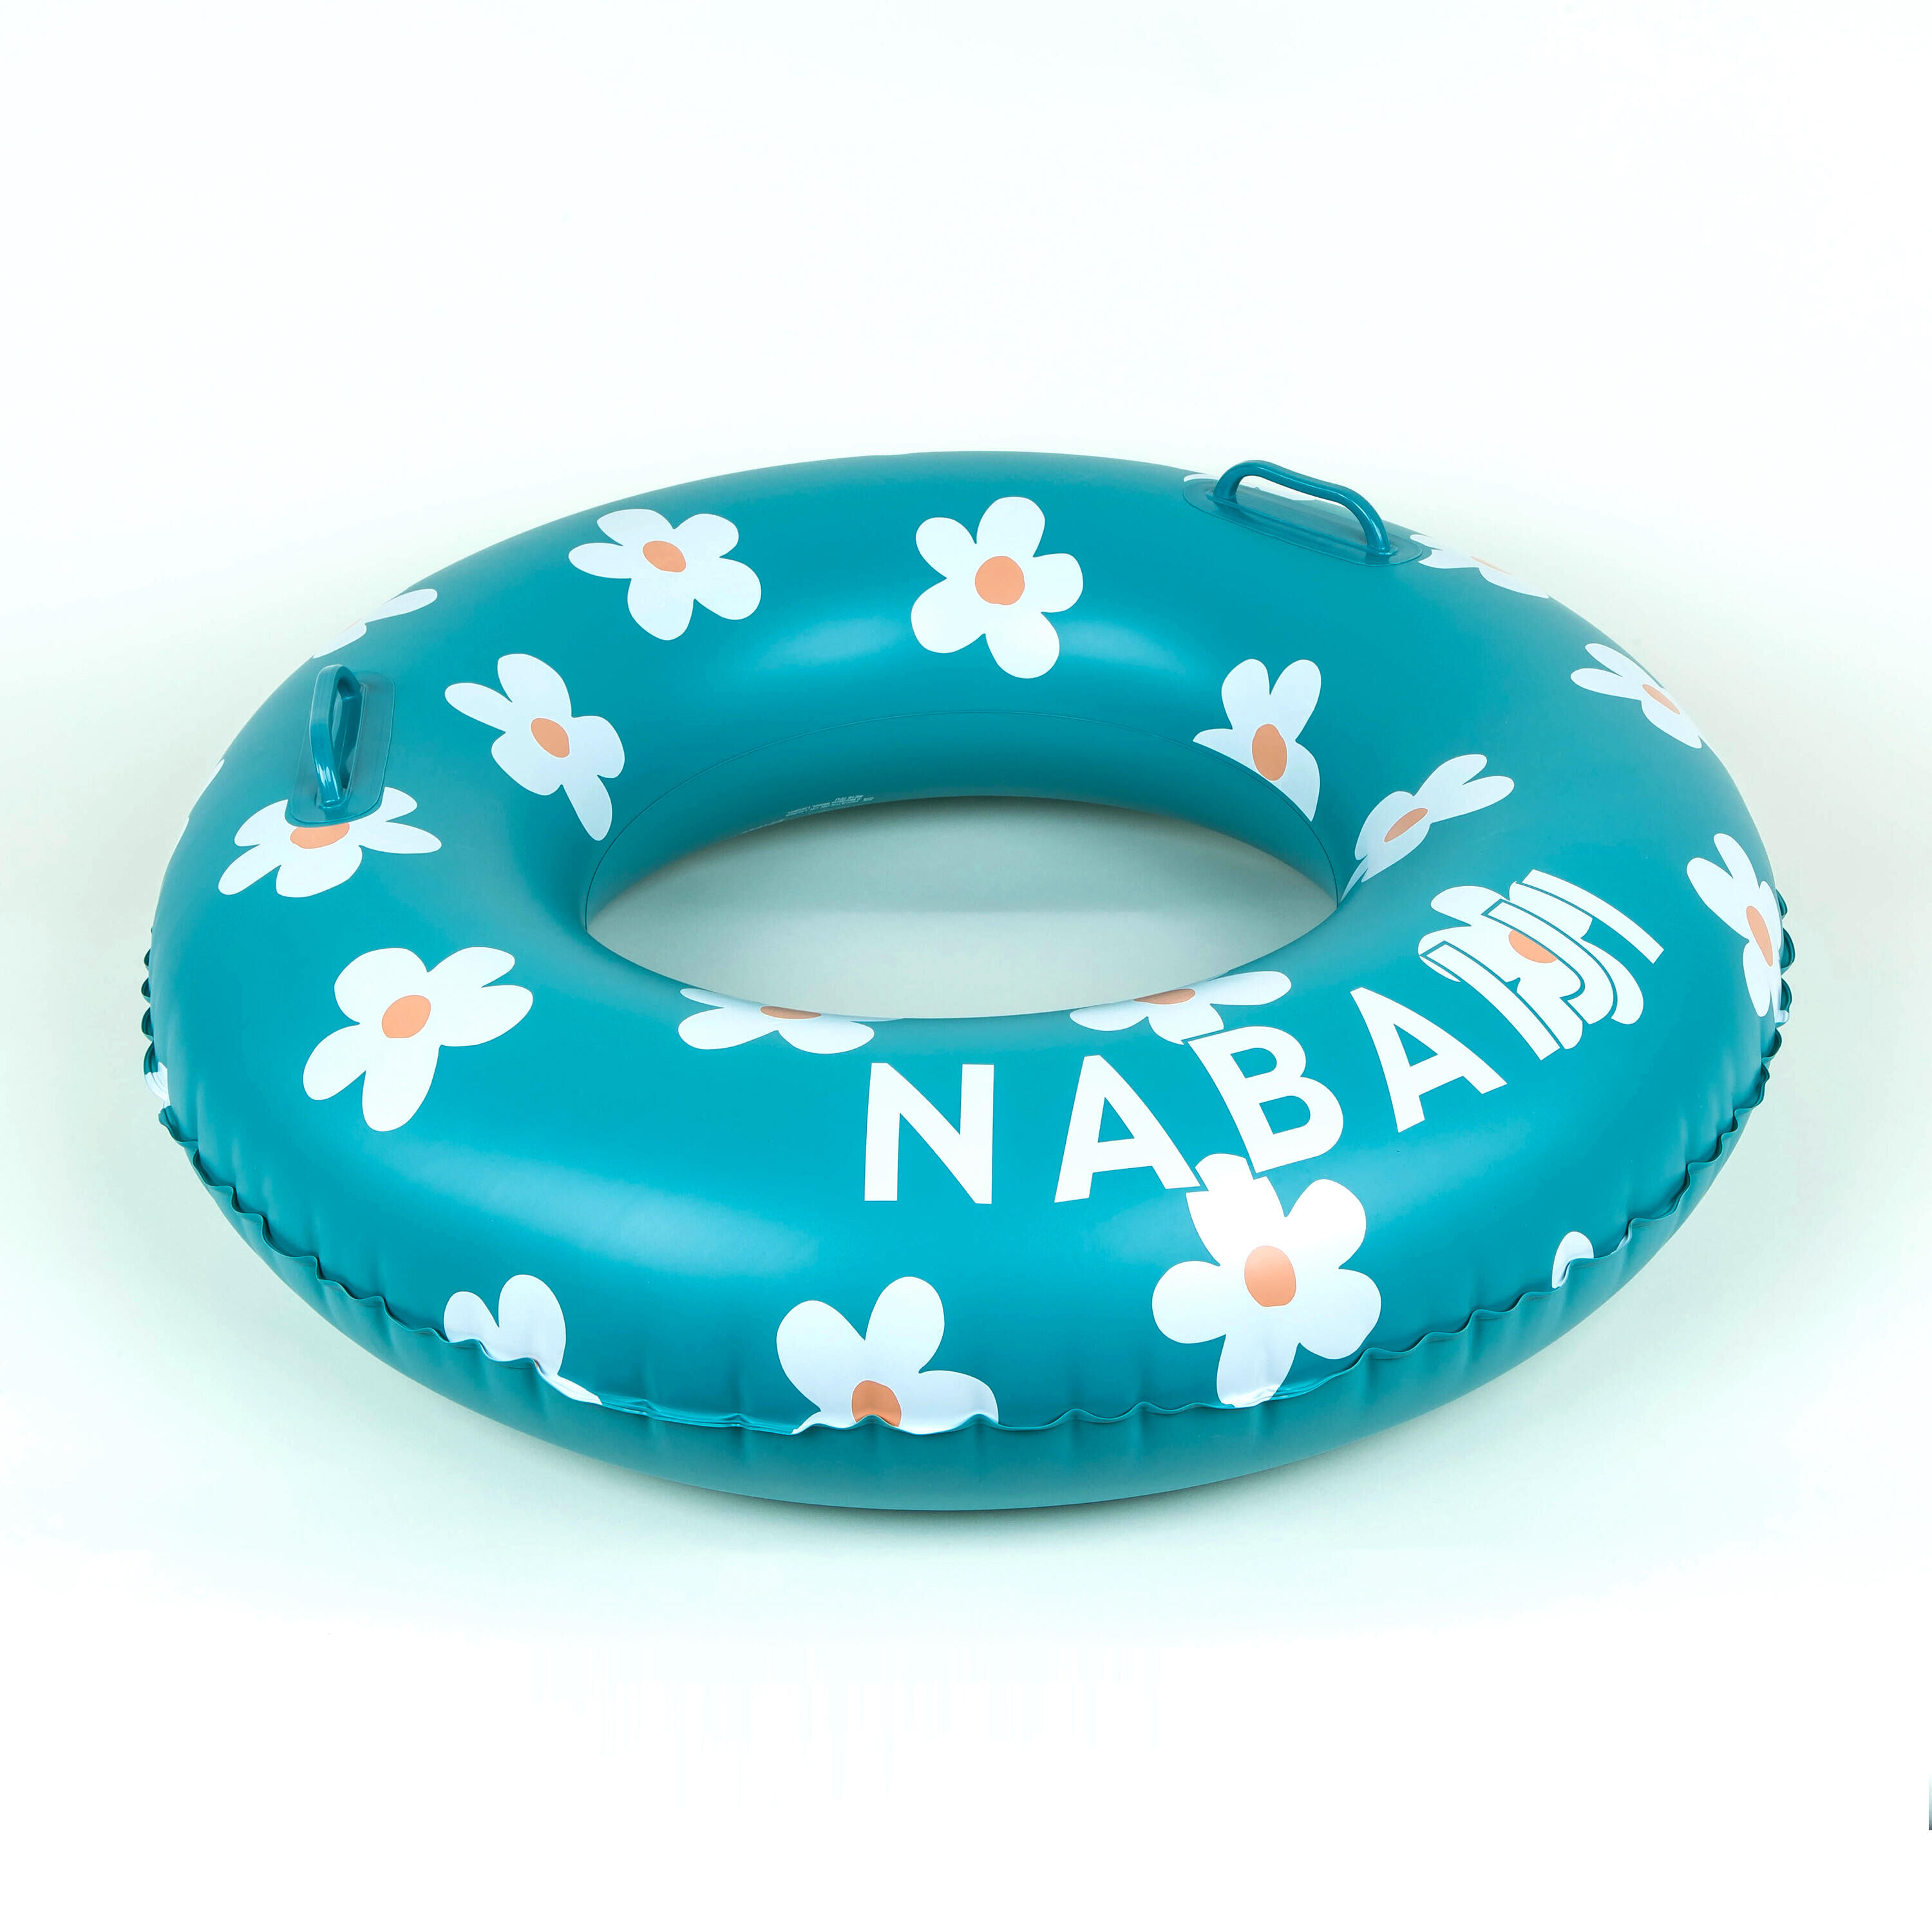 NABAIJI Large 92 cm inflatable printed pool ring with comfort grips